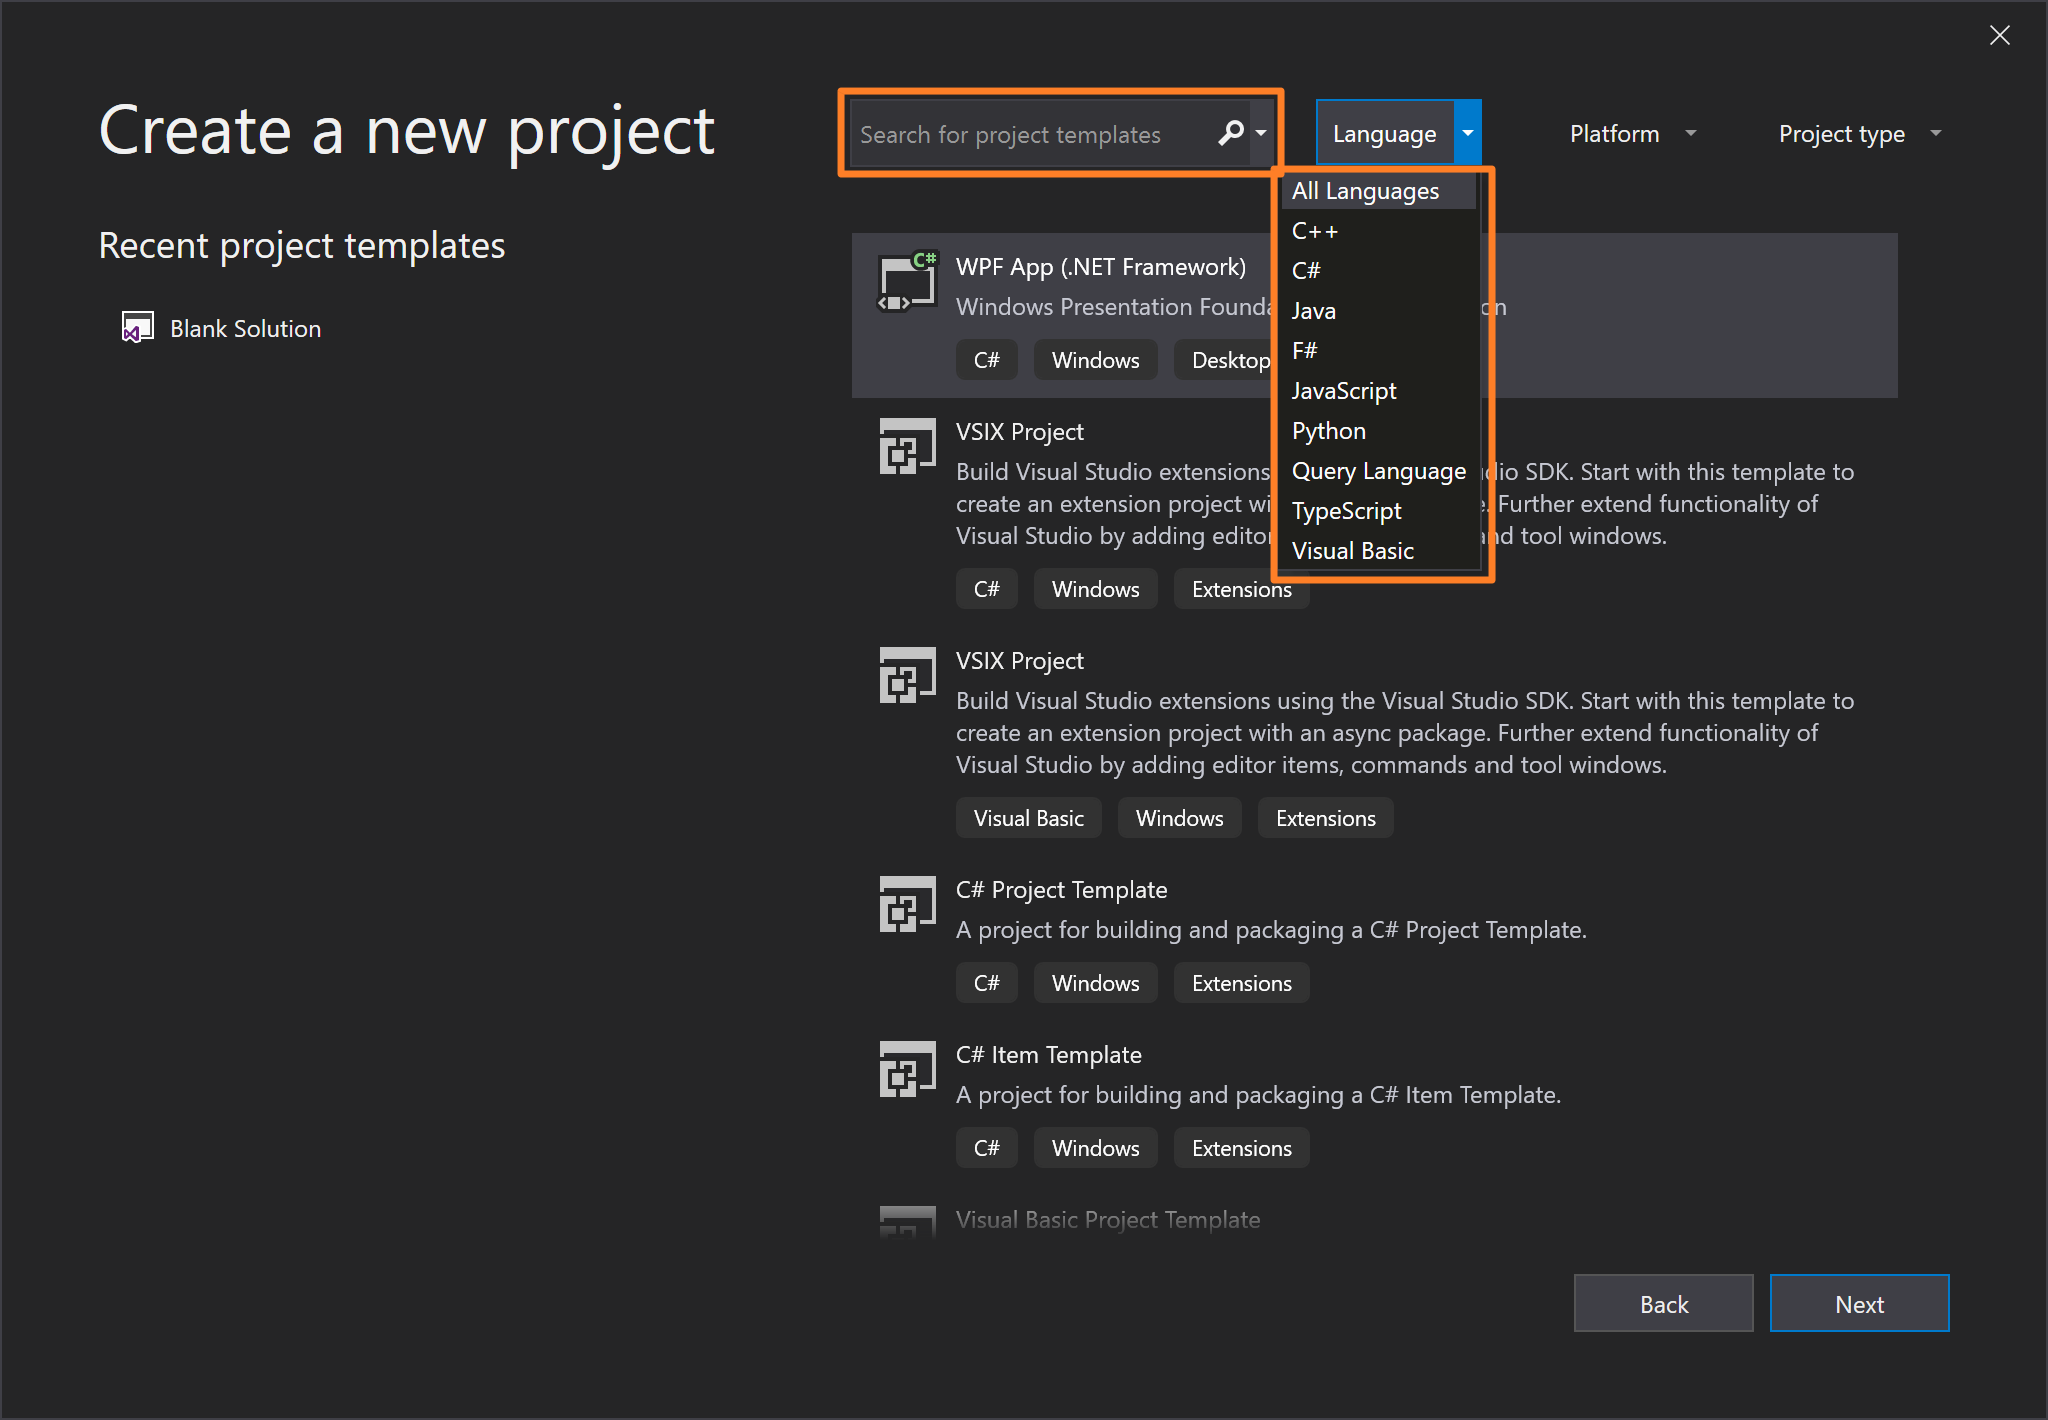 Search and filter in the New Project dialog box